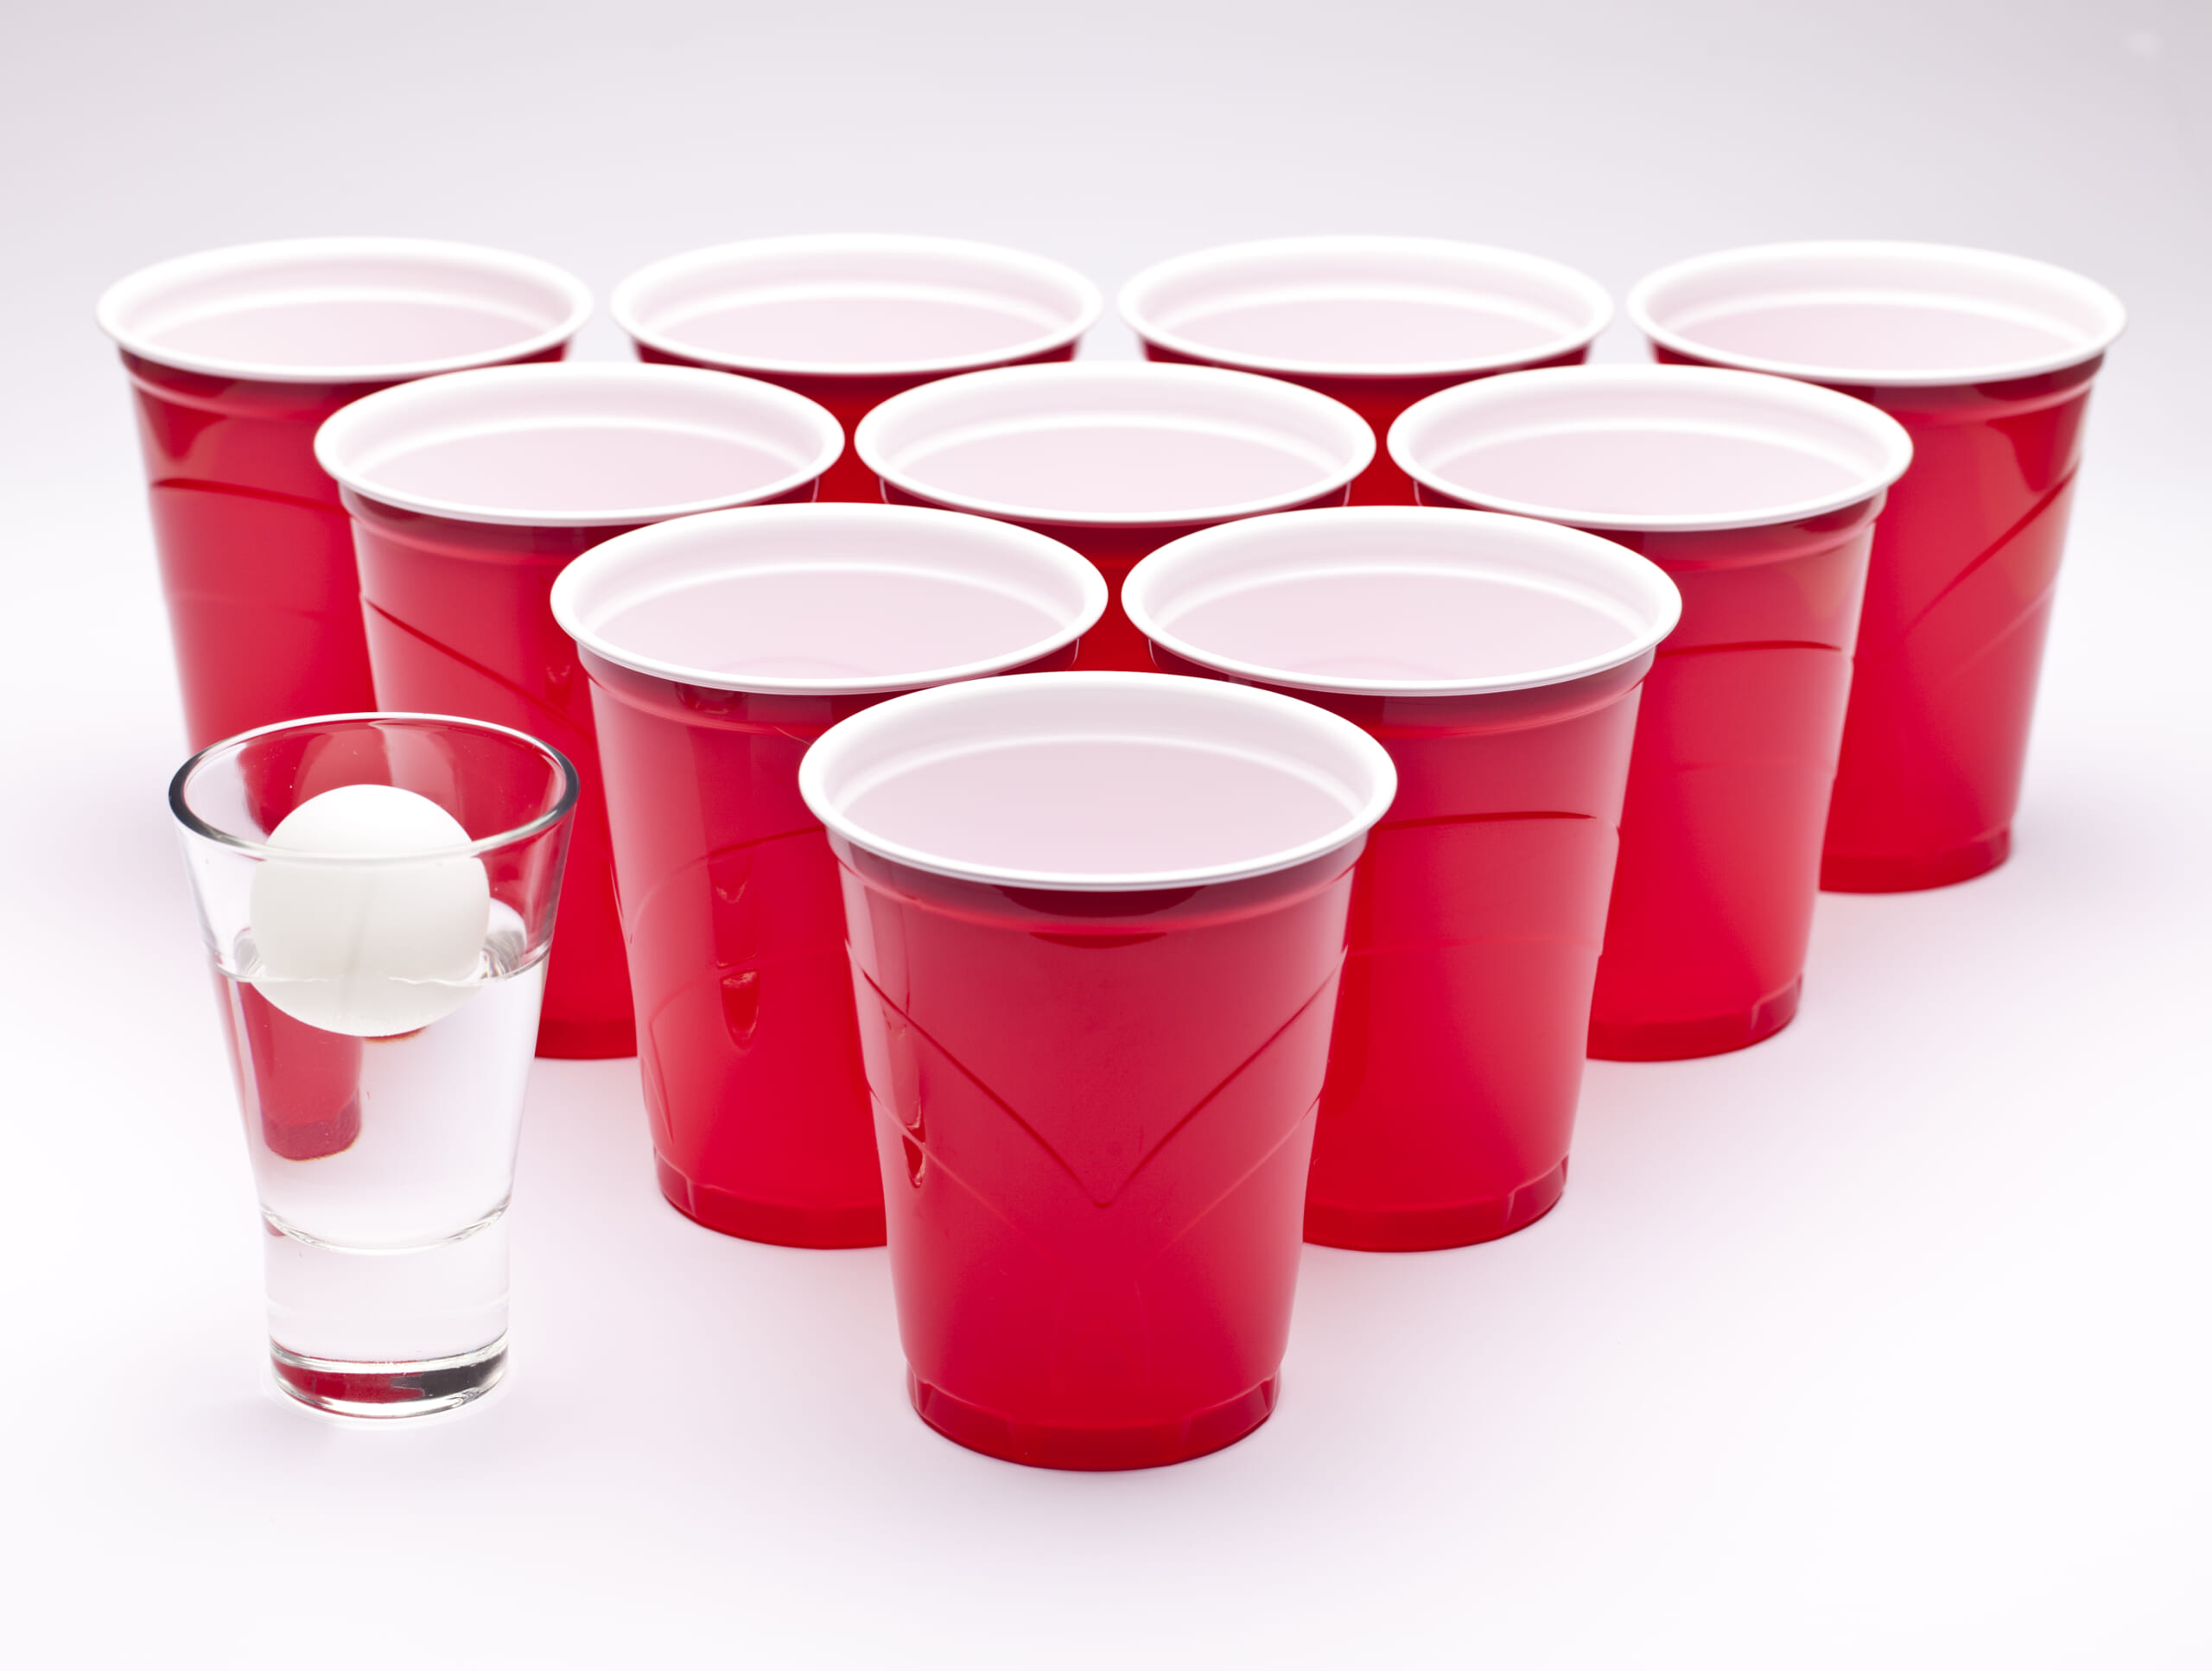 Toby Keith - Red Solo Cup (Unedited Version) 